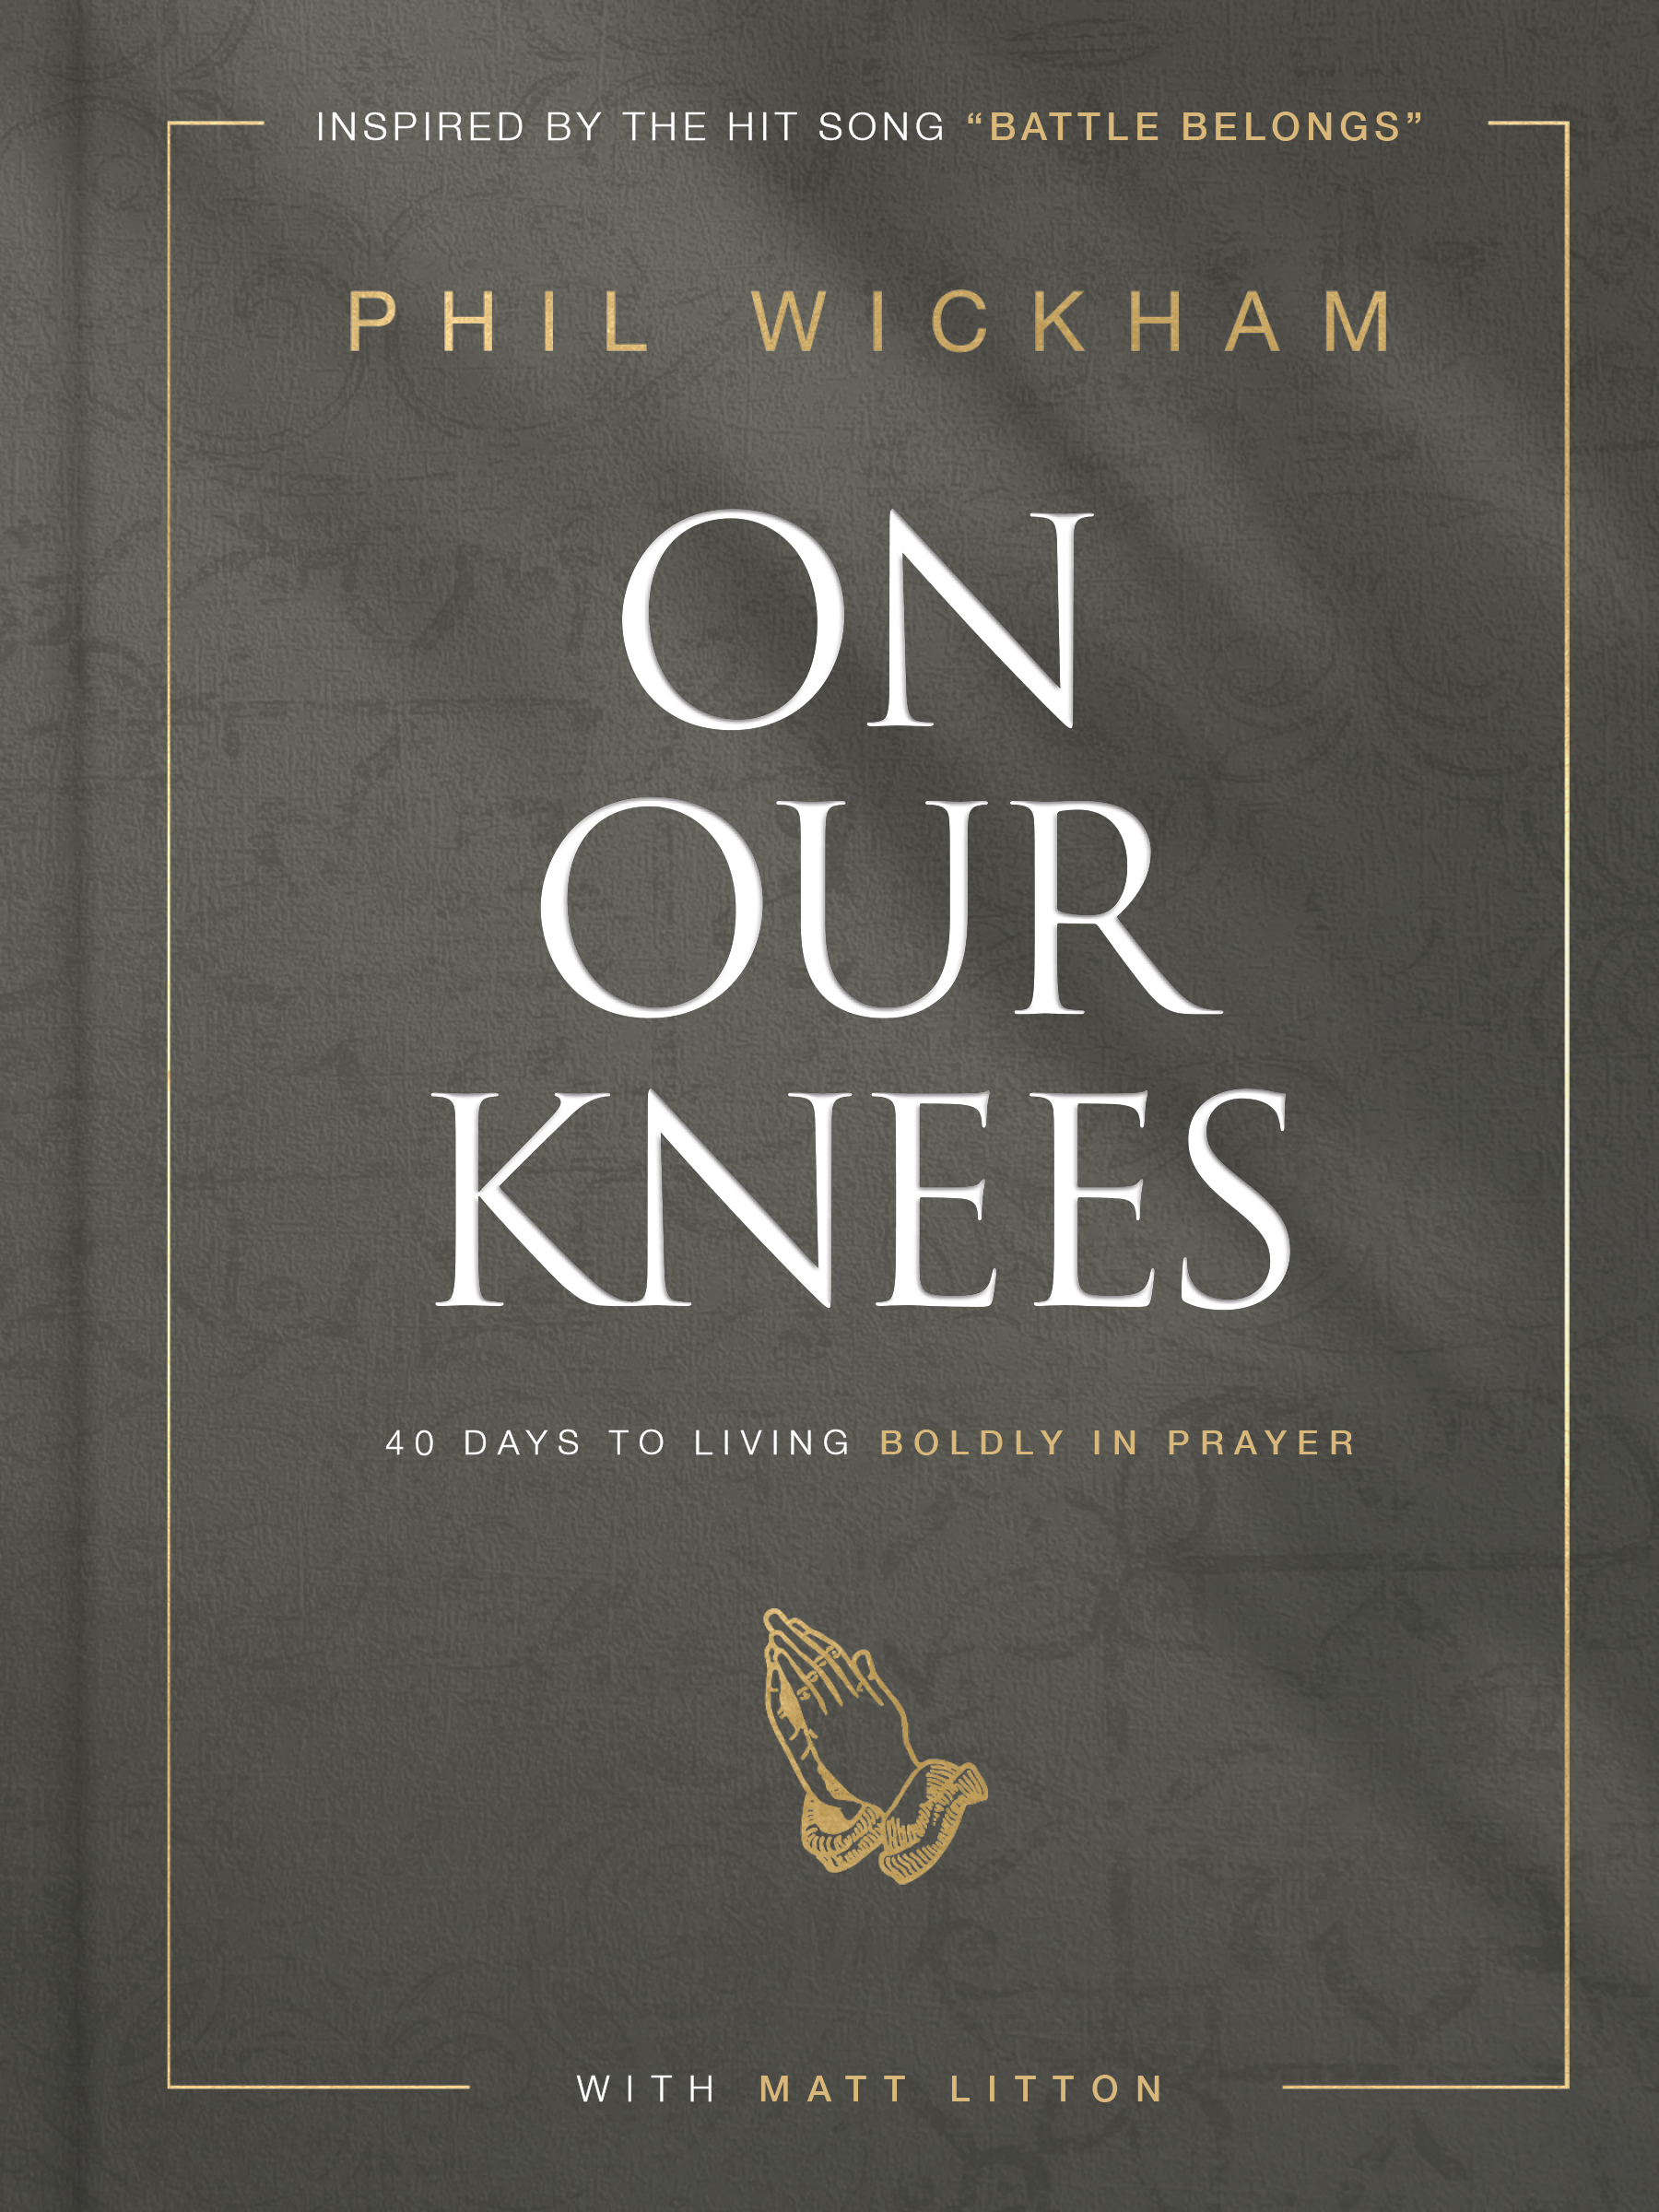 On Our Knees book cover. Grey color with white titling and gold border detail